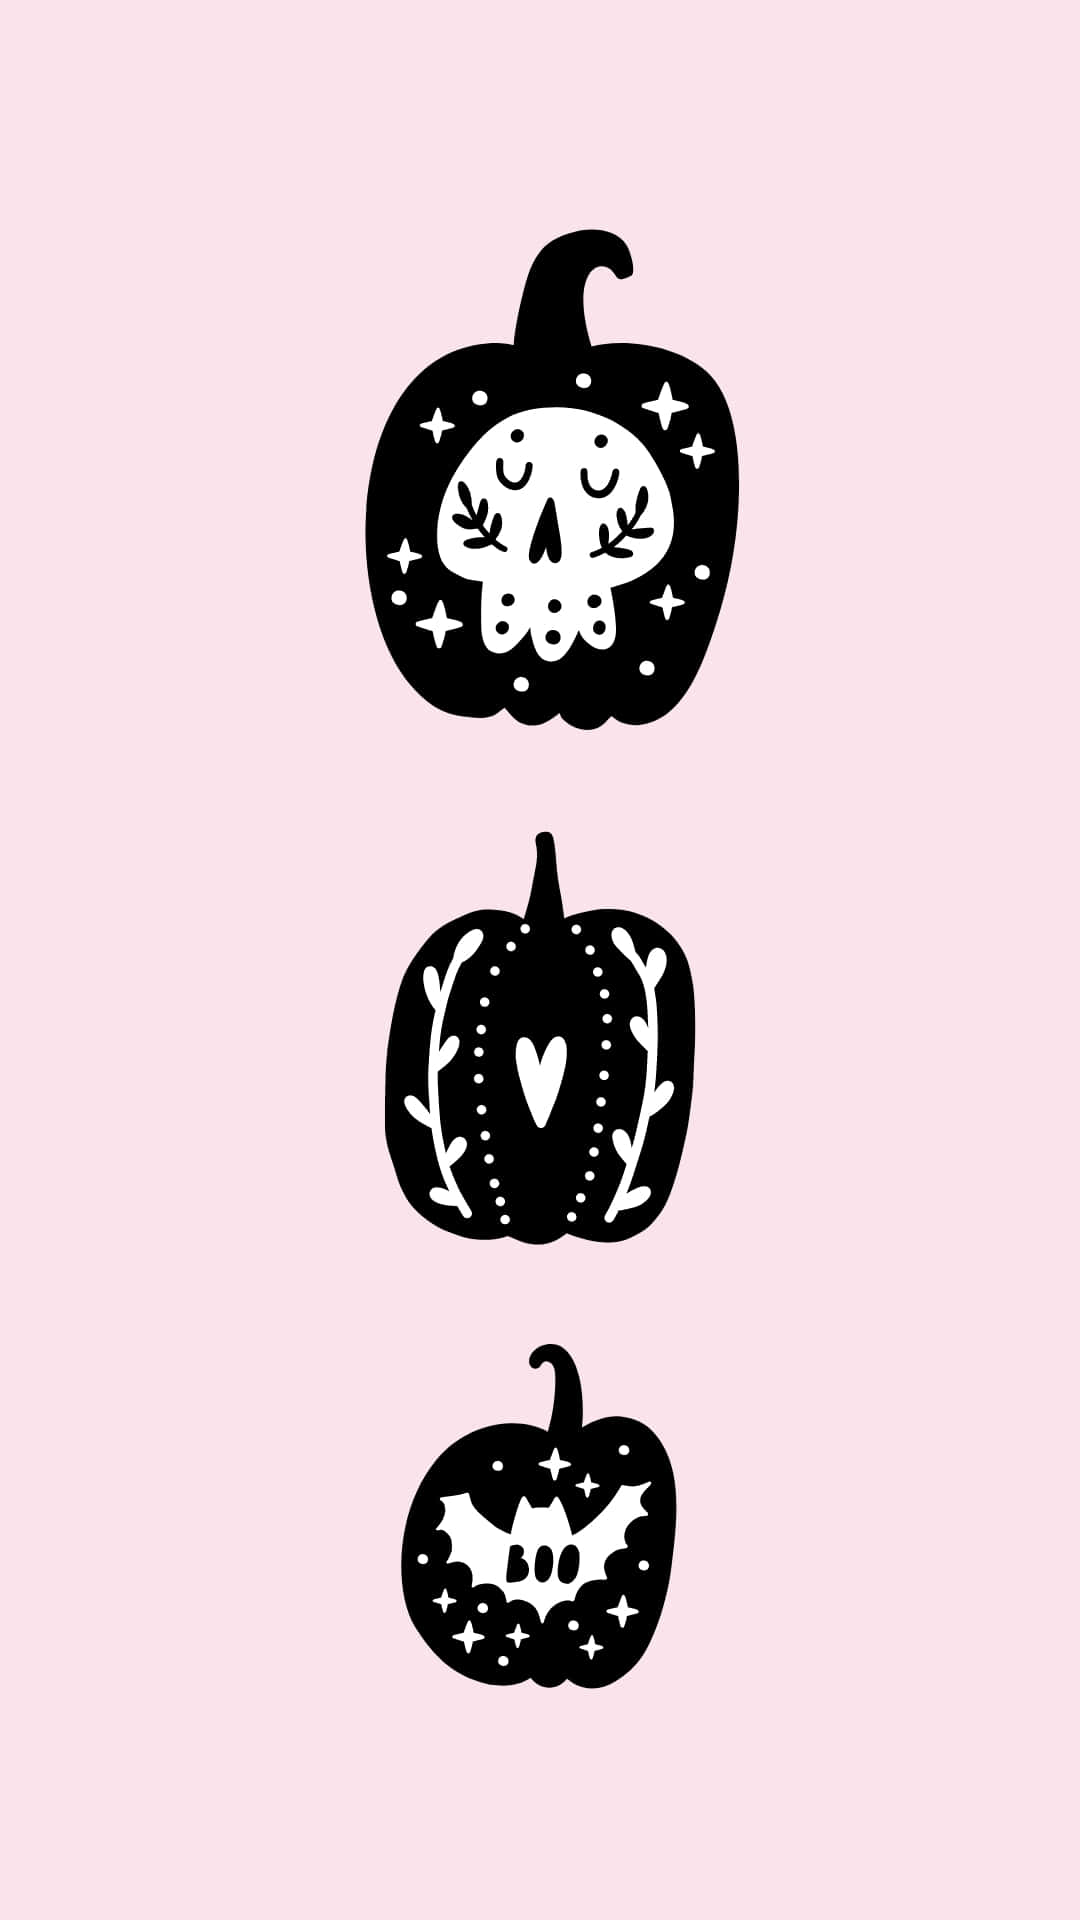 Experience the spookier side of Halloween with an Iphone Cute Halloween themed wallpaper!